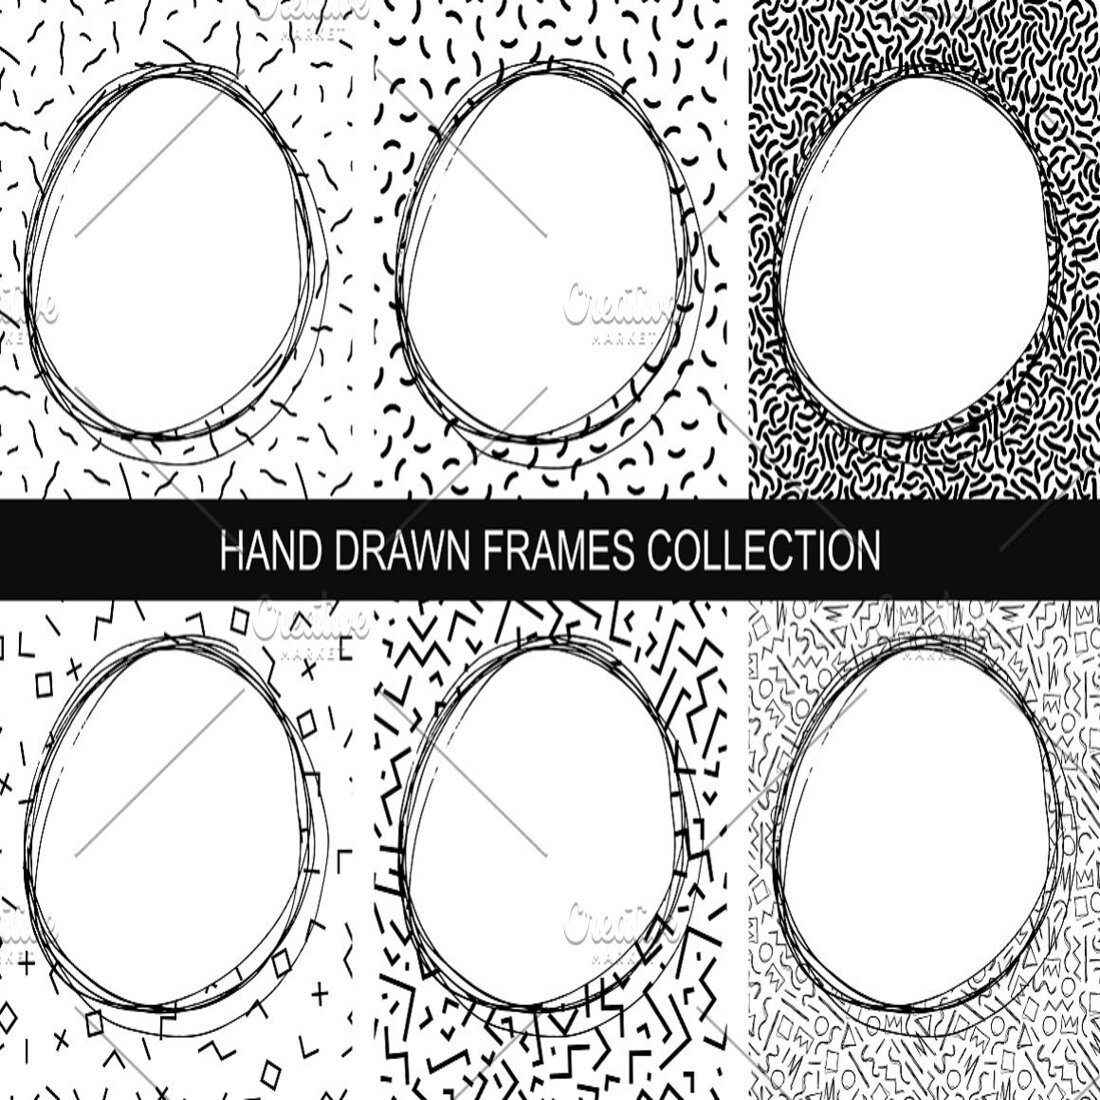 Collection of hand drawn frames.